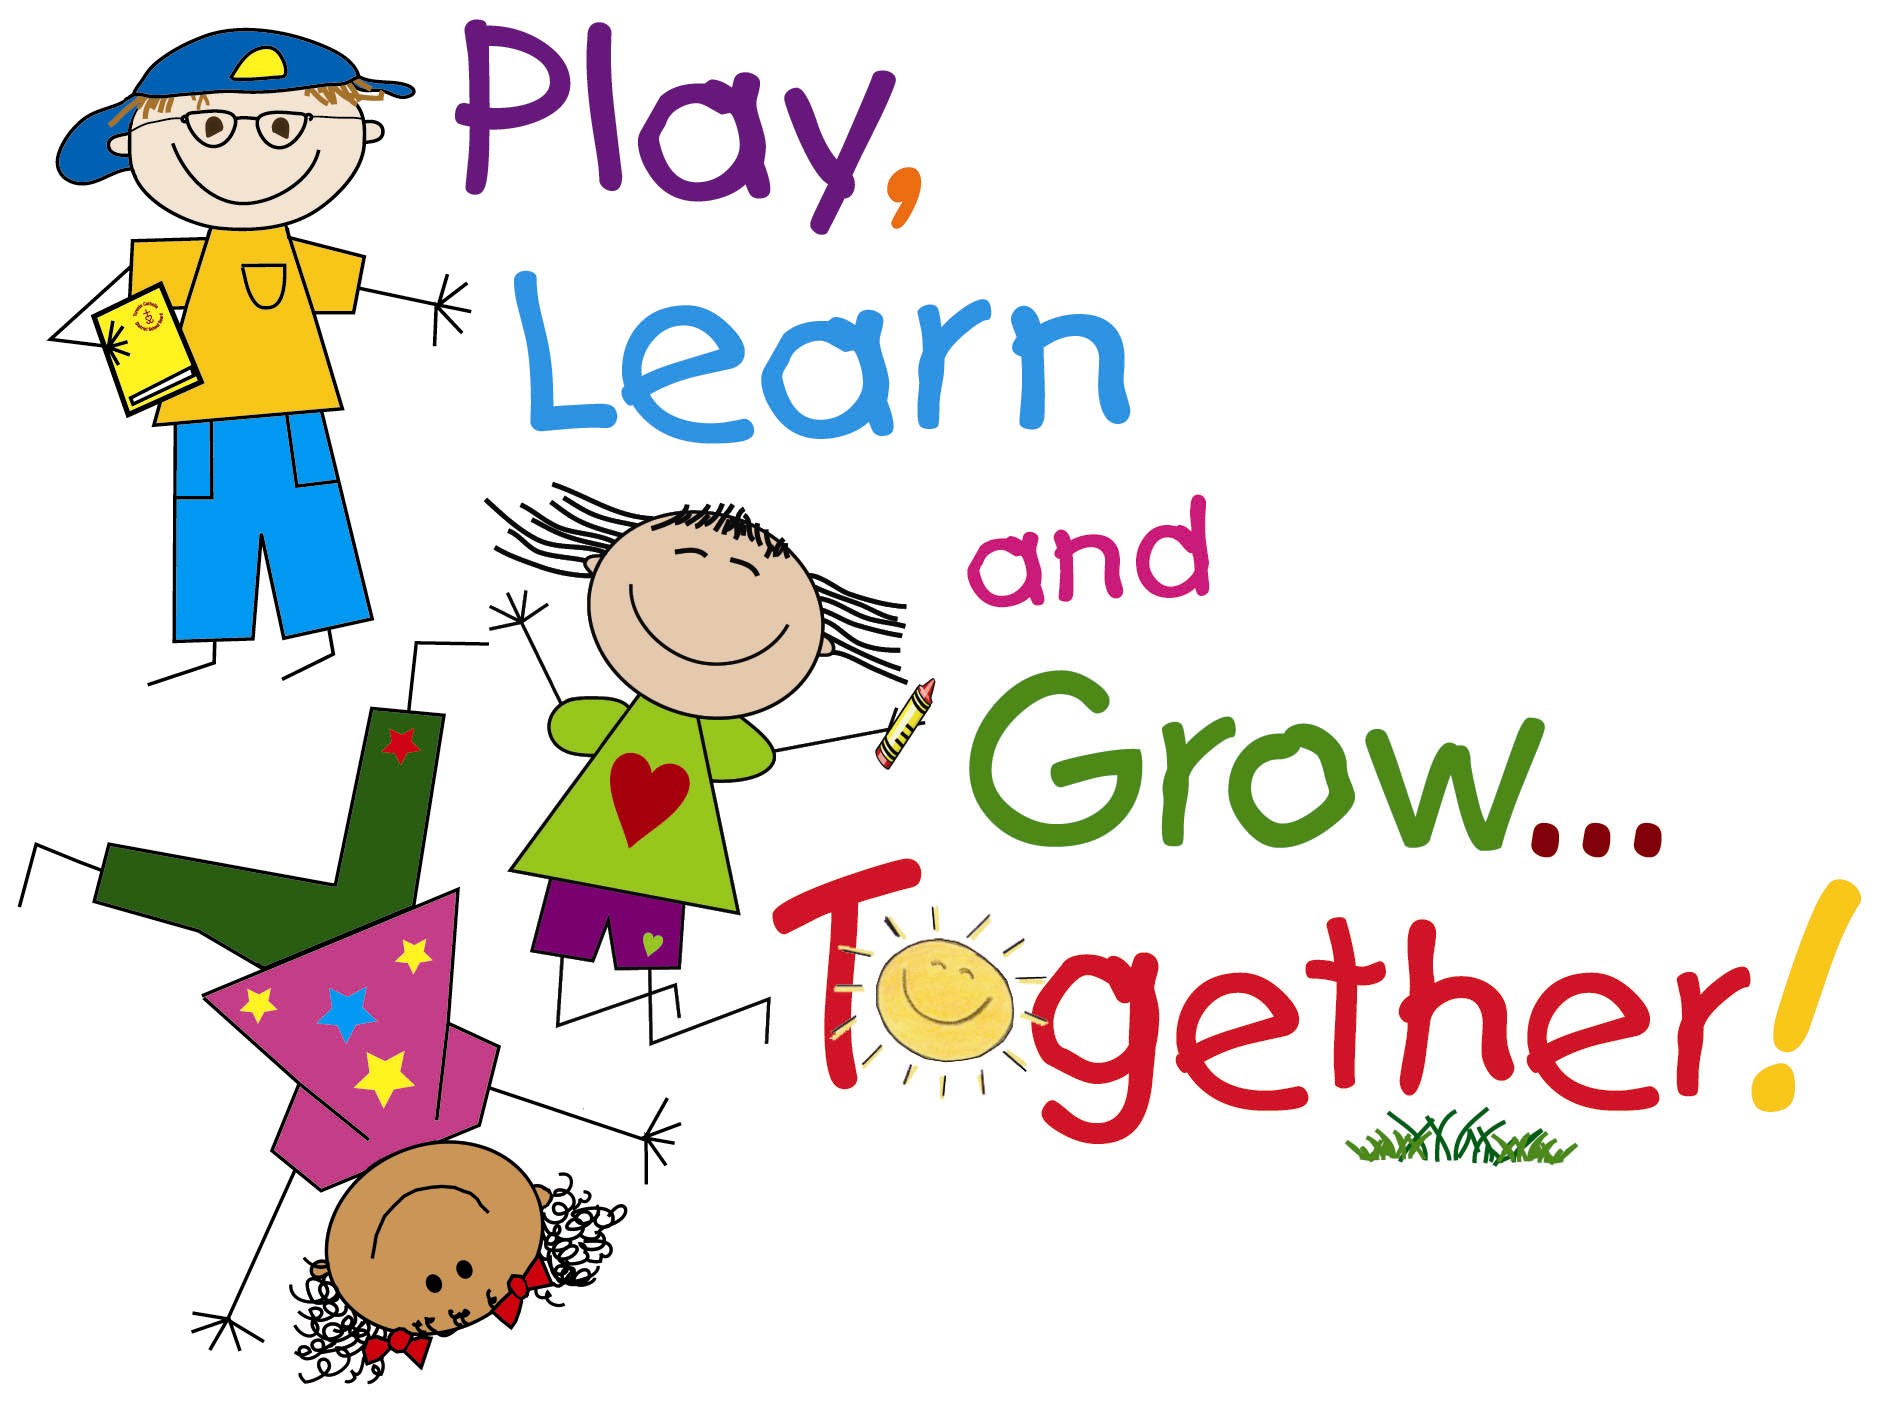 Drawing of kids playing and learning together.